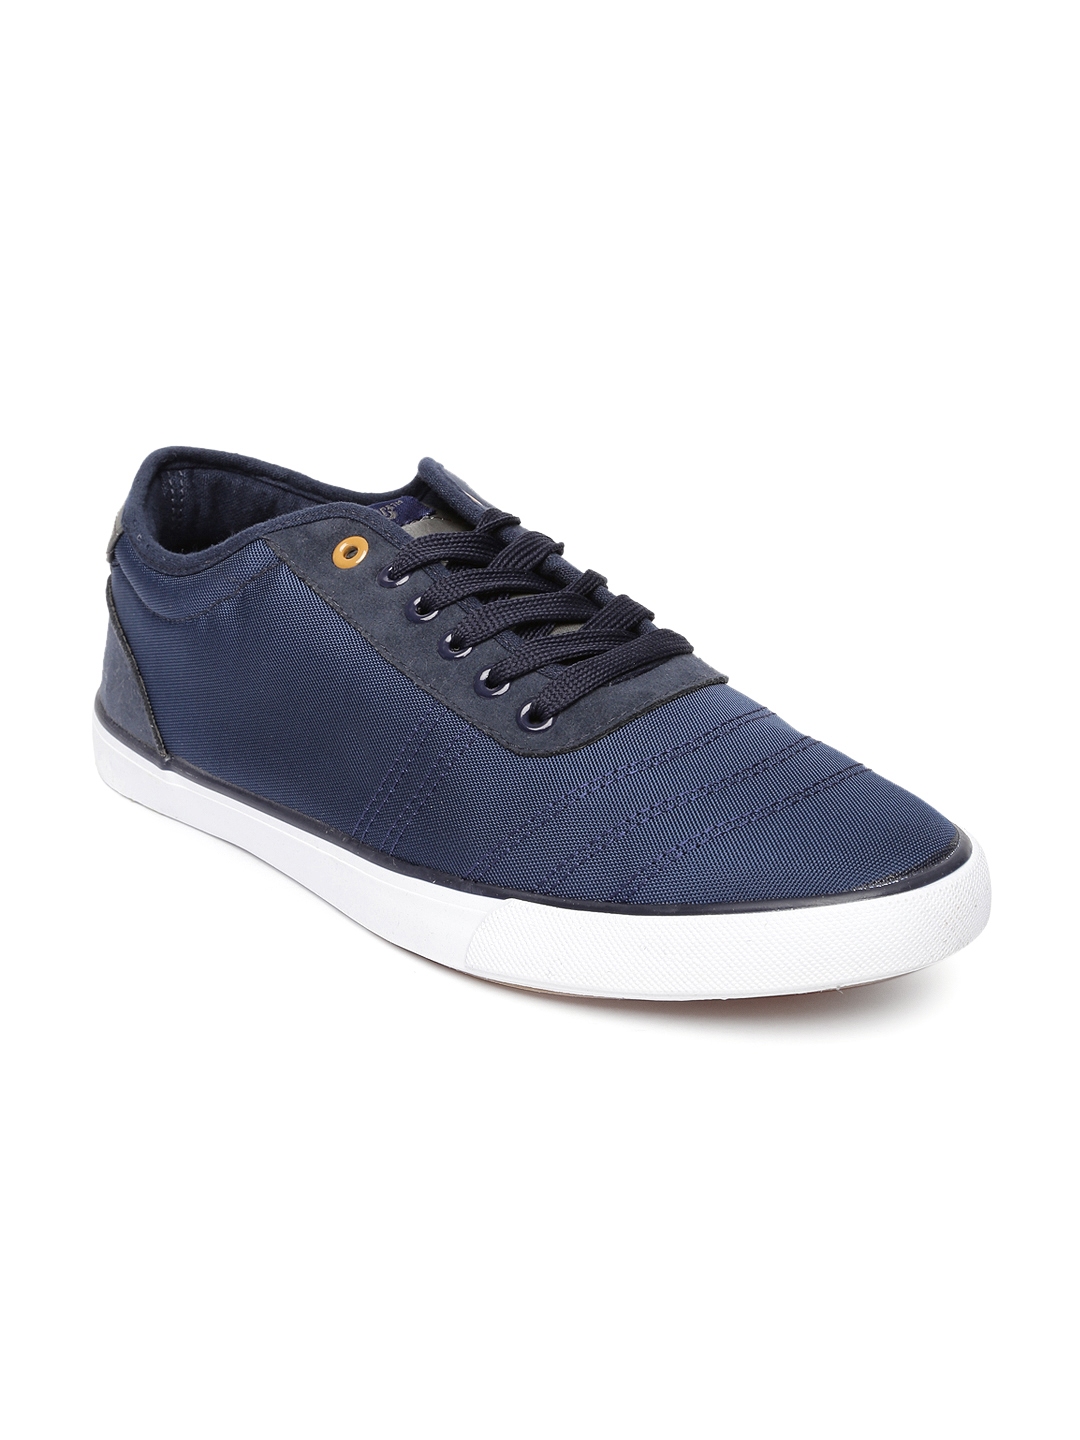 Buy Roadster Men Navy Casual Shoes - Casual Shoes for Men 1201952 | Myntra